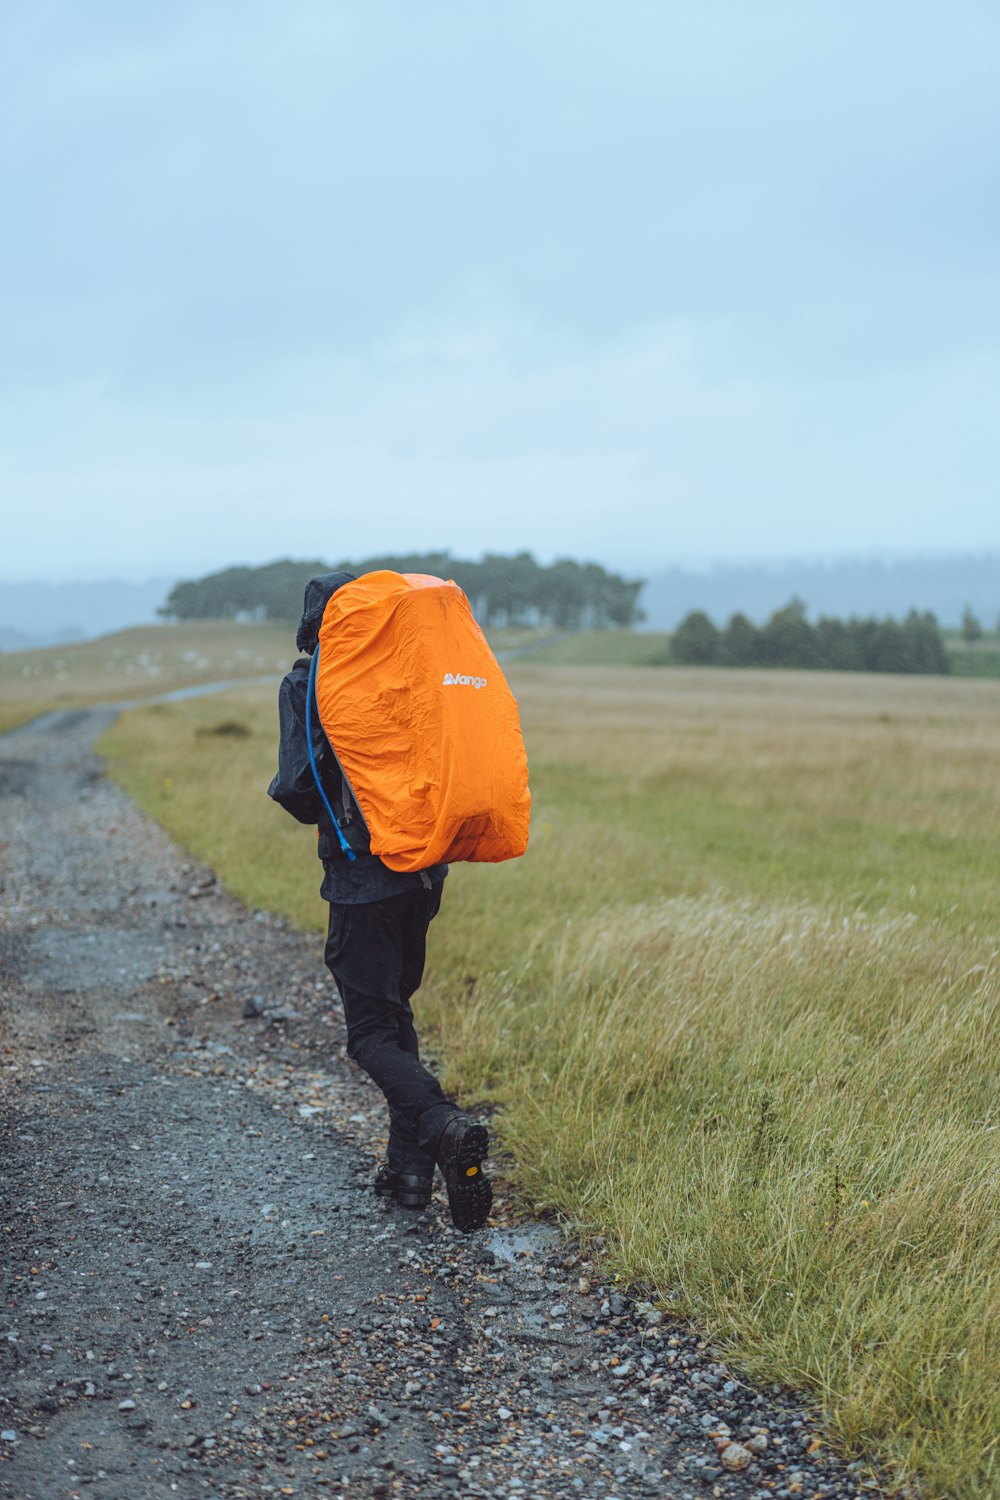 person in orange and black jacket walking on dirt road during daytime